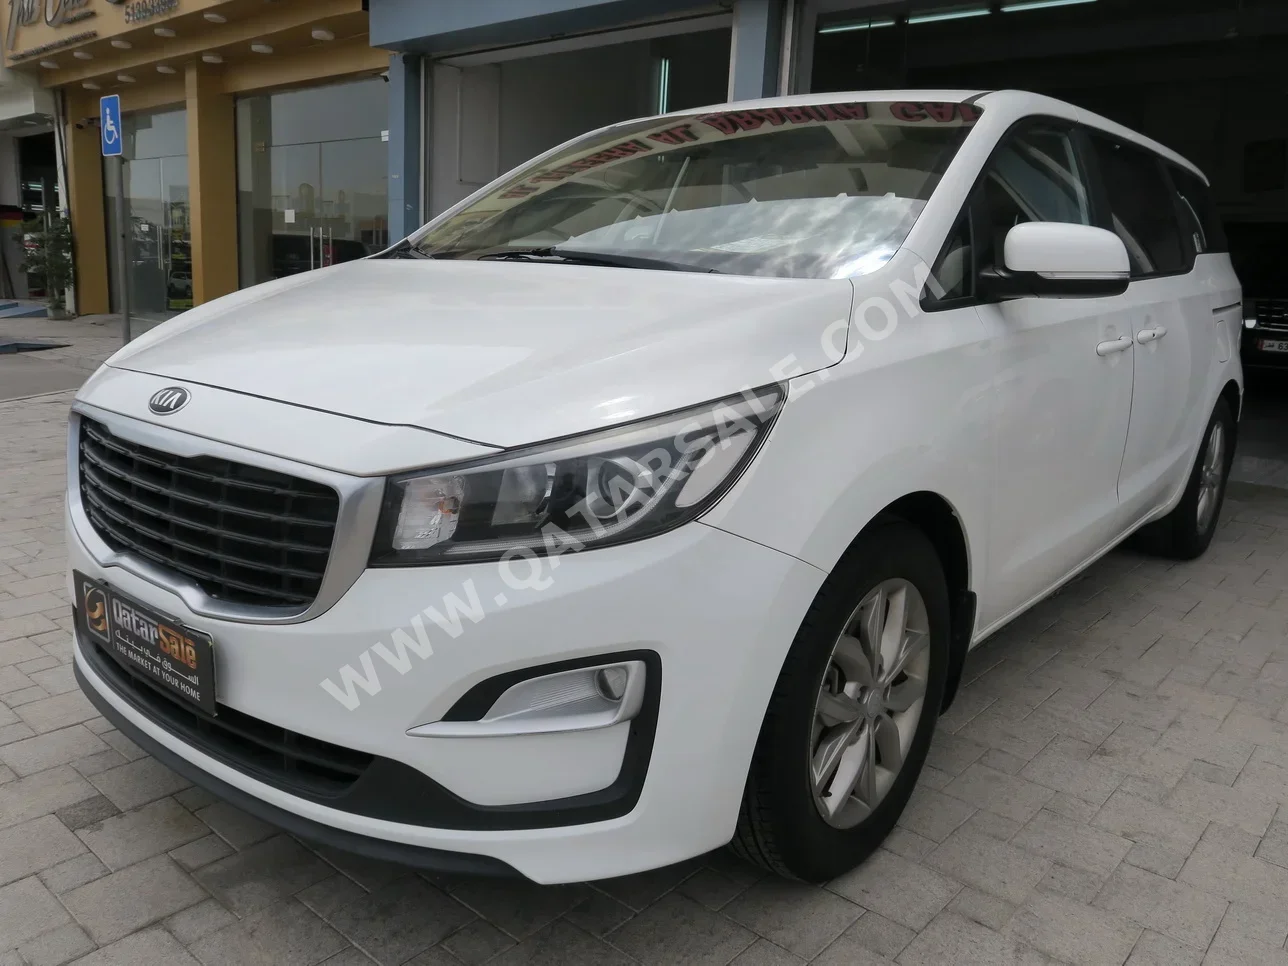 Kia  Carnival  2019  Automatic  195,000 Km  6 Cylinder  Front Wheel Drive (FWD)  Van / Bus  White